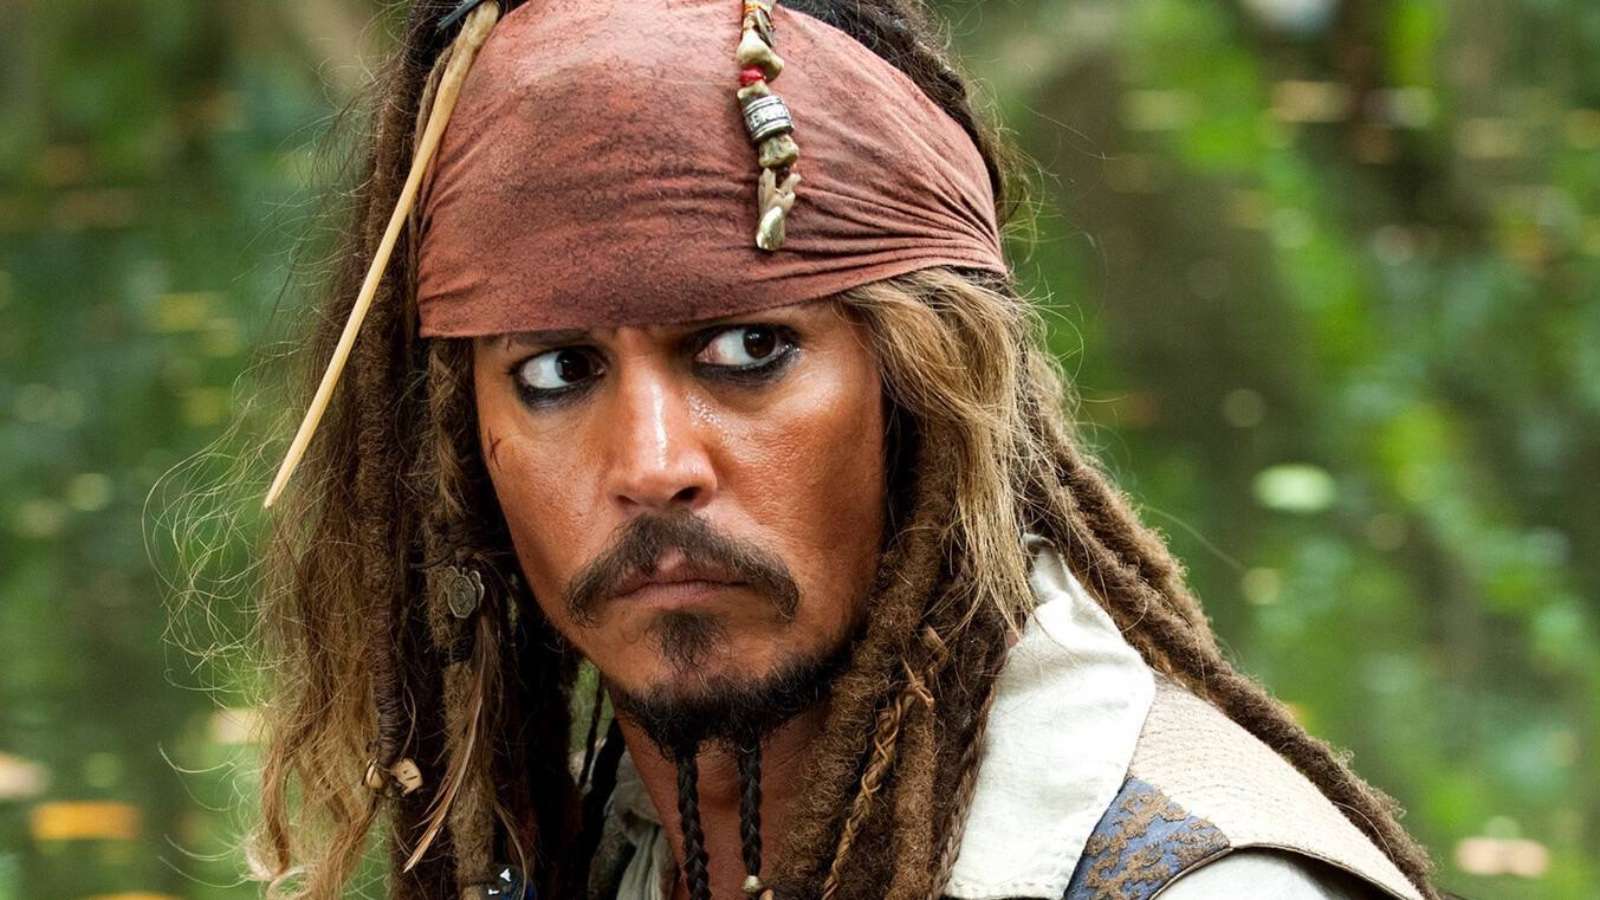 Johnny Depp in Pirates of the Caribbean as Jack Sparrow.